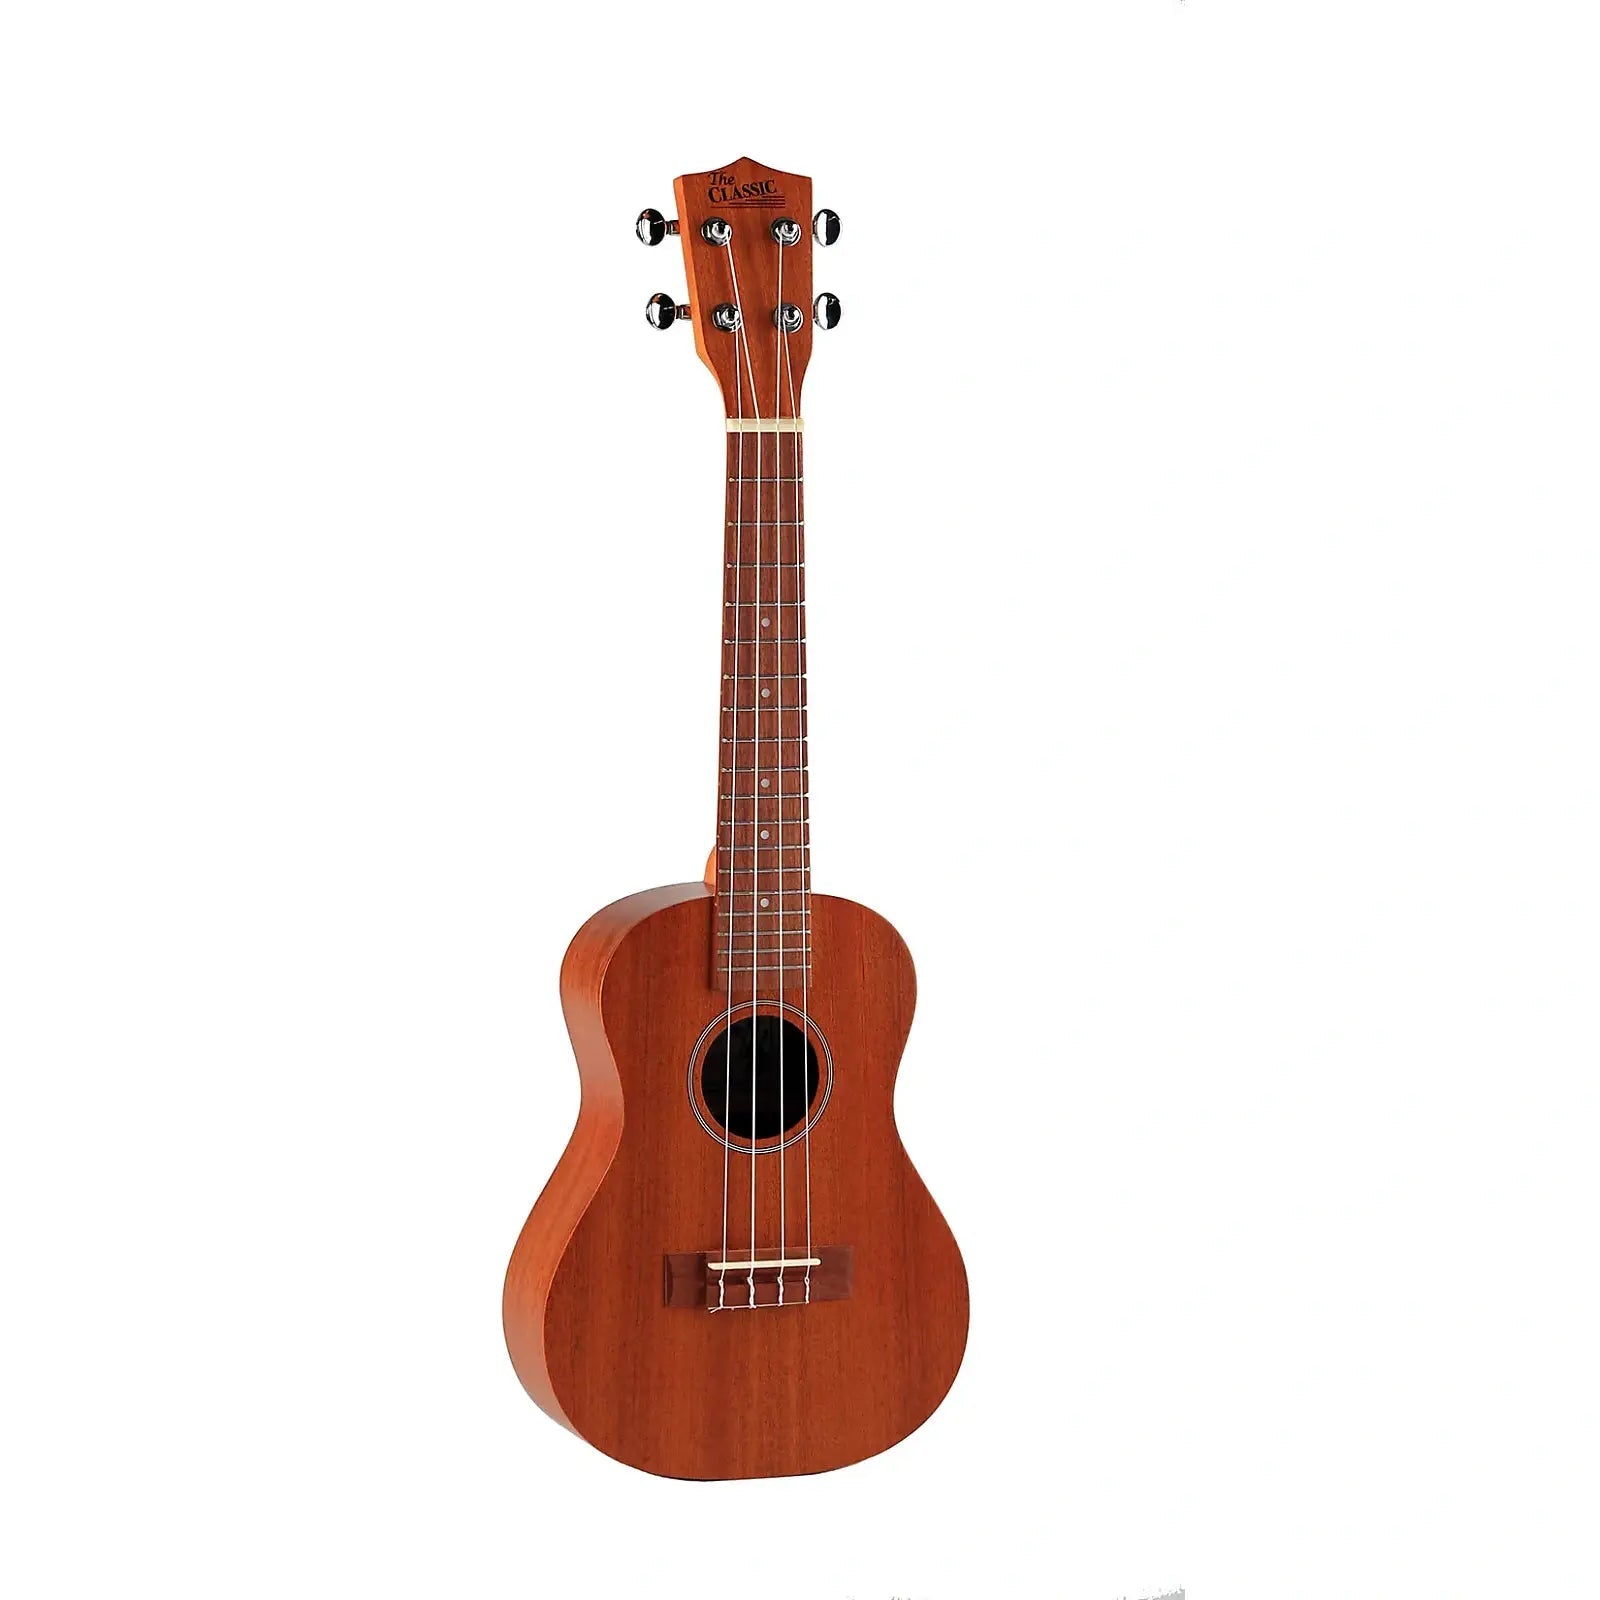 ☆Buy THE CLASSIC™ Tenor Ukulele - CL600M Online at Empire Music